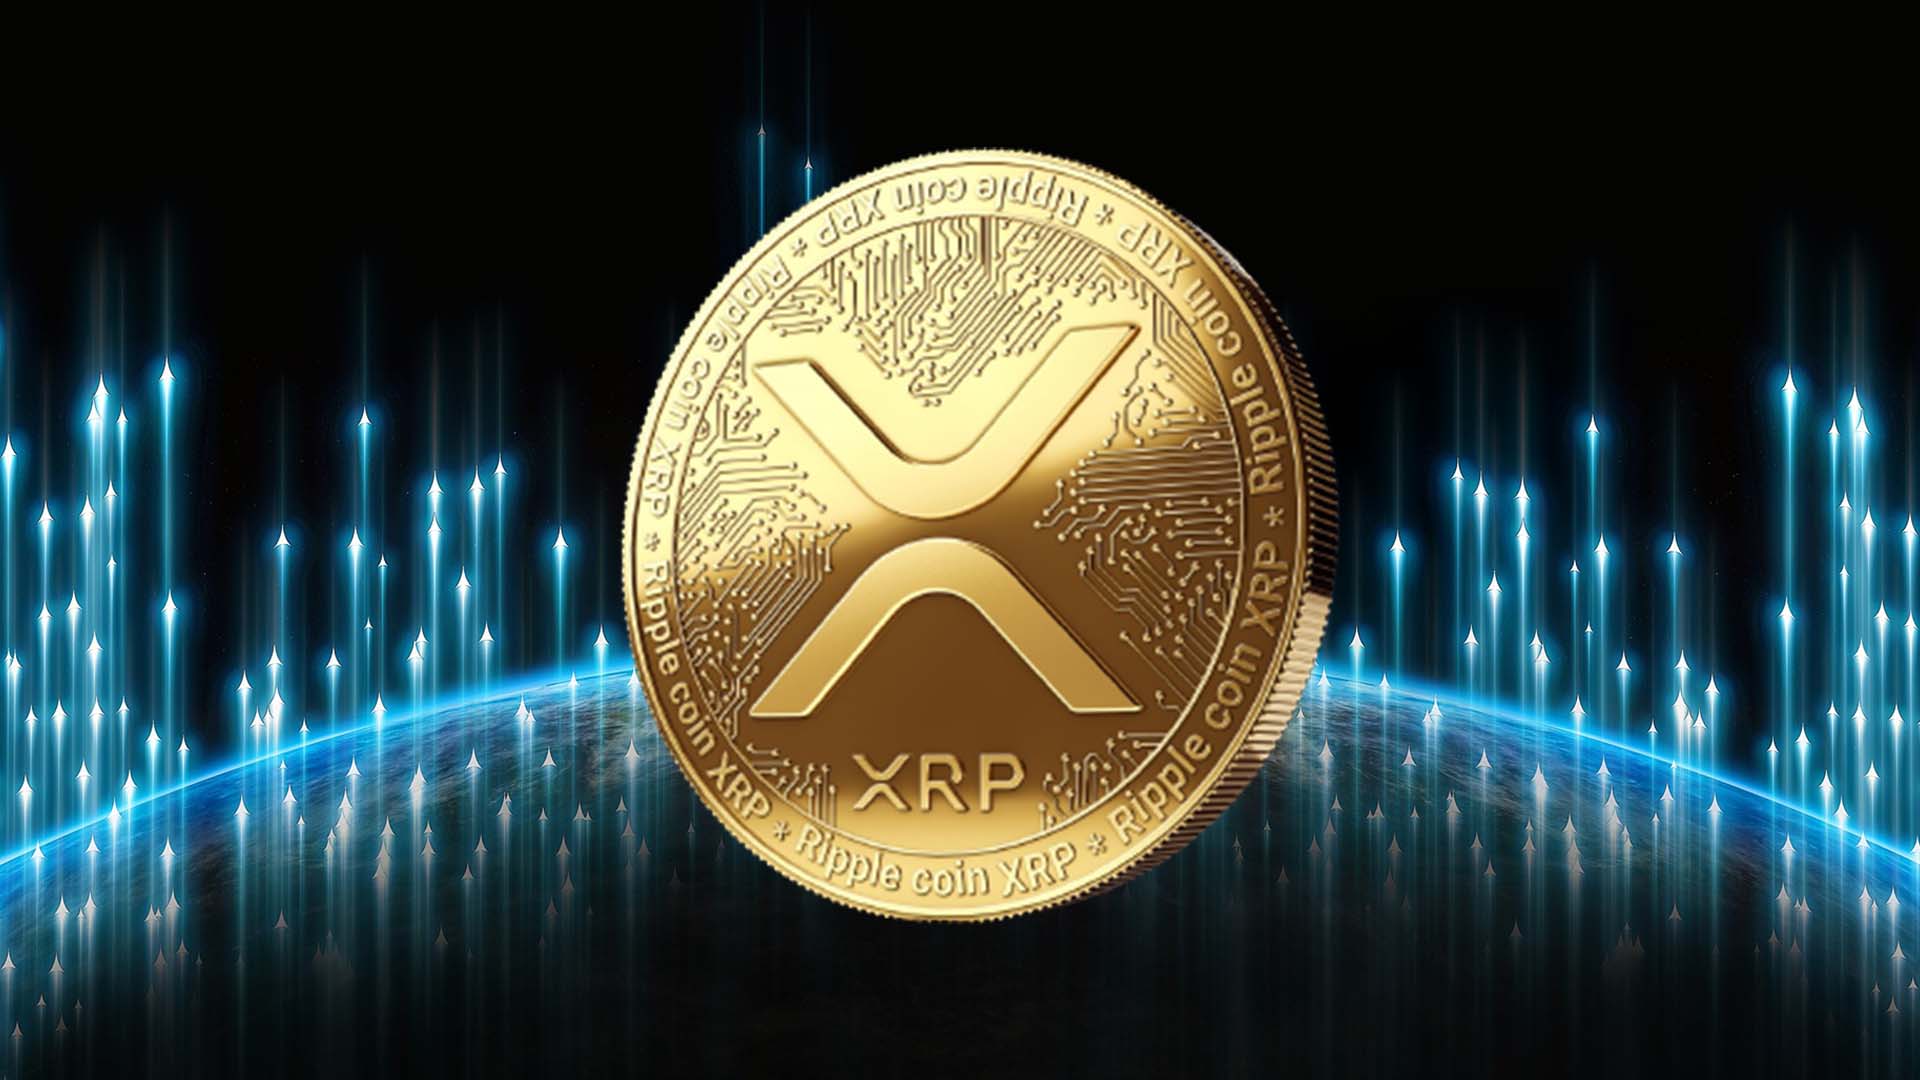 XRP Holders Flocking to New ICO with Potential to Emulate Bitcoin’s 18,912% ROI